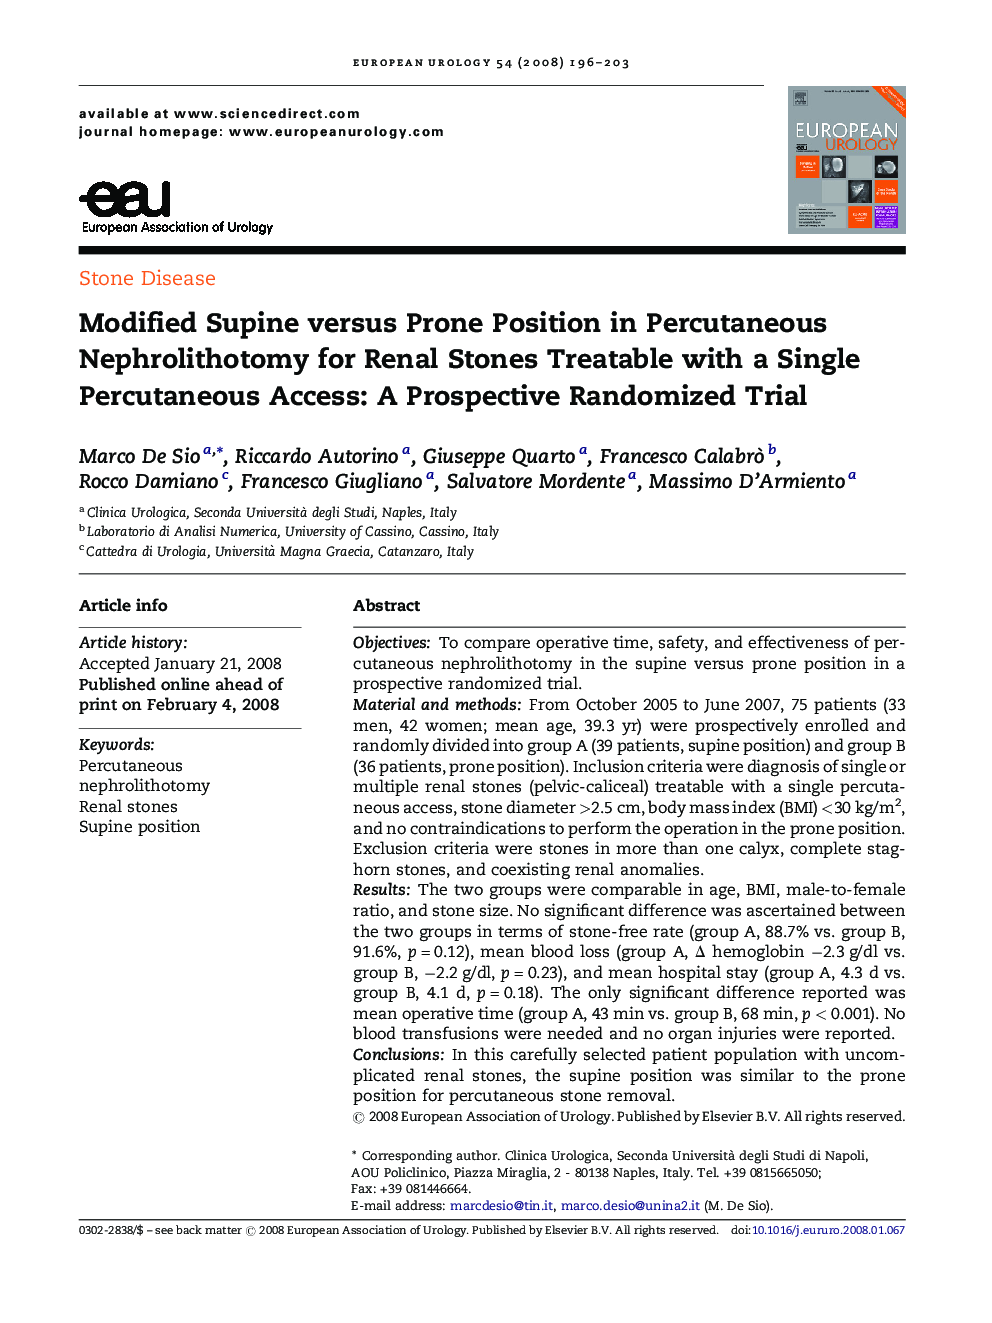 Modified Supine versus Prone Position in Percutaneous Nephrolithotomy for Renal Stones Treatable with a Single Percutaneous Access: A Prospective Randomized Trial